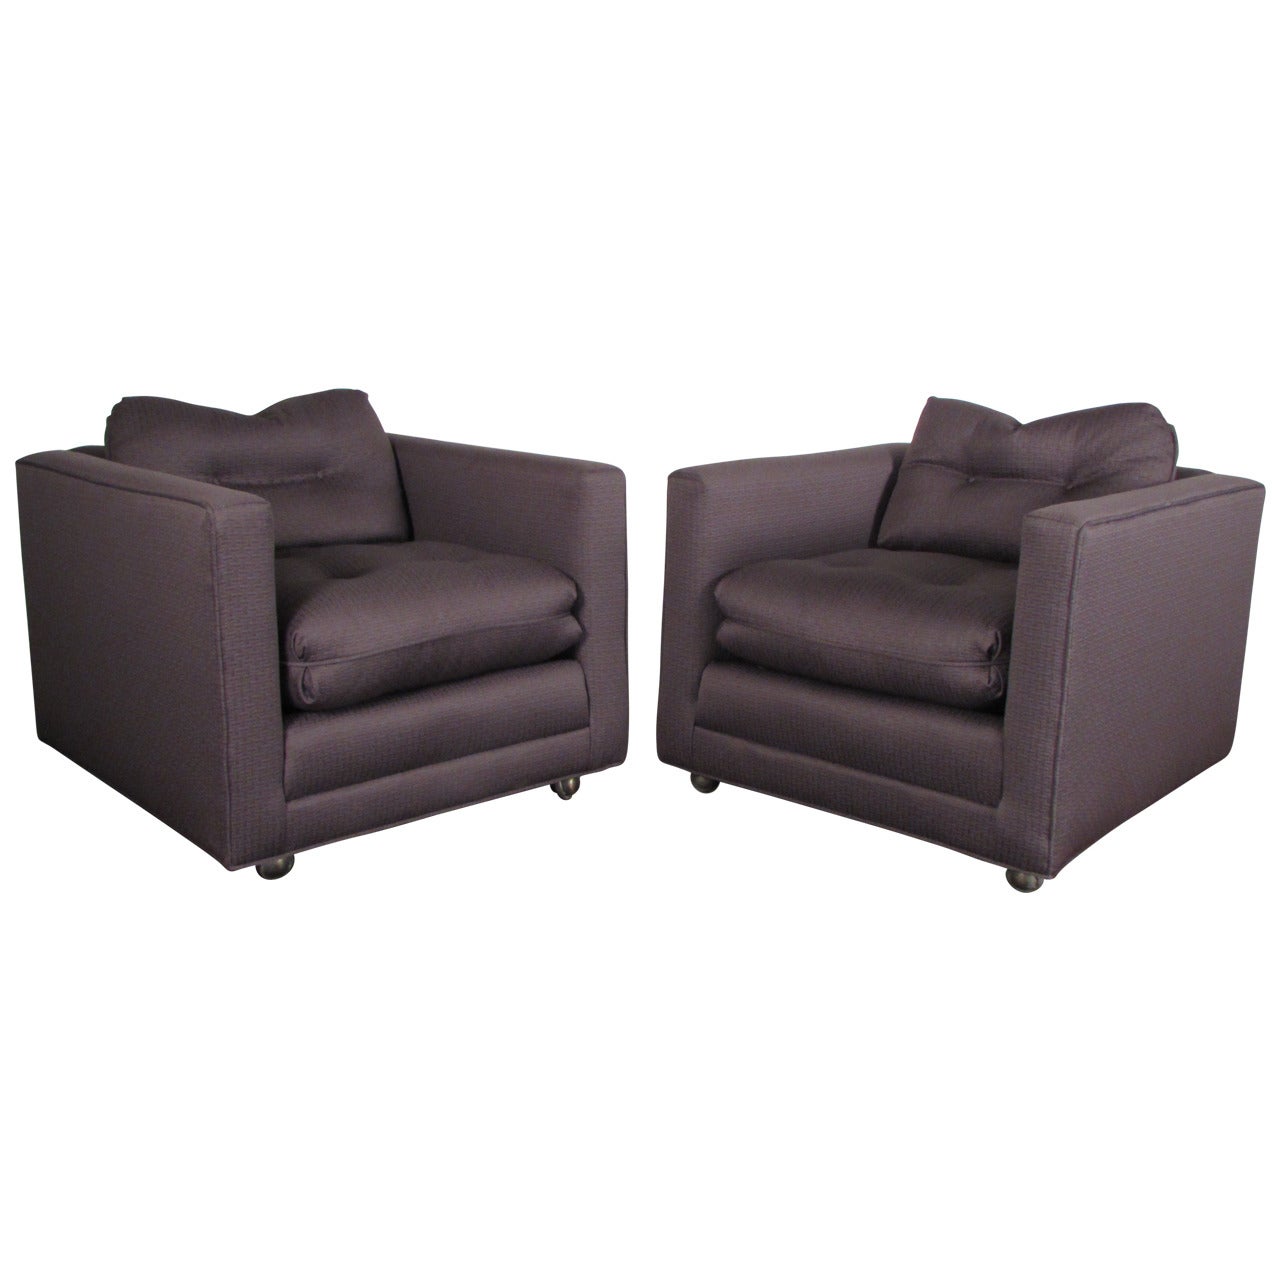 Handsome Pair of Henredon Club Chairs with Down Cushions